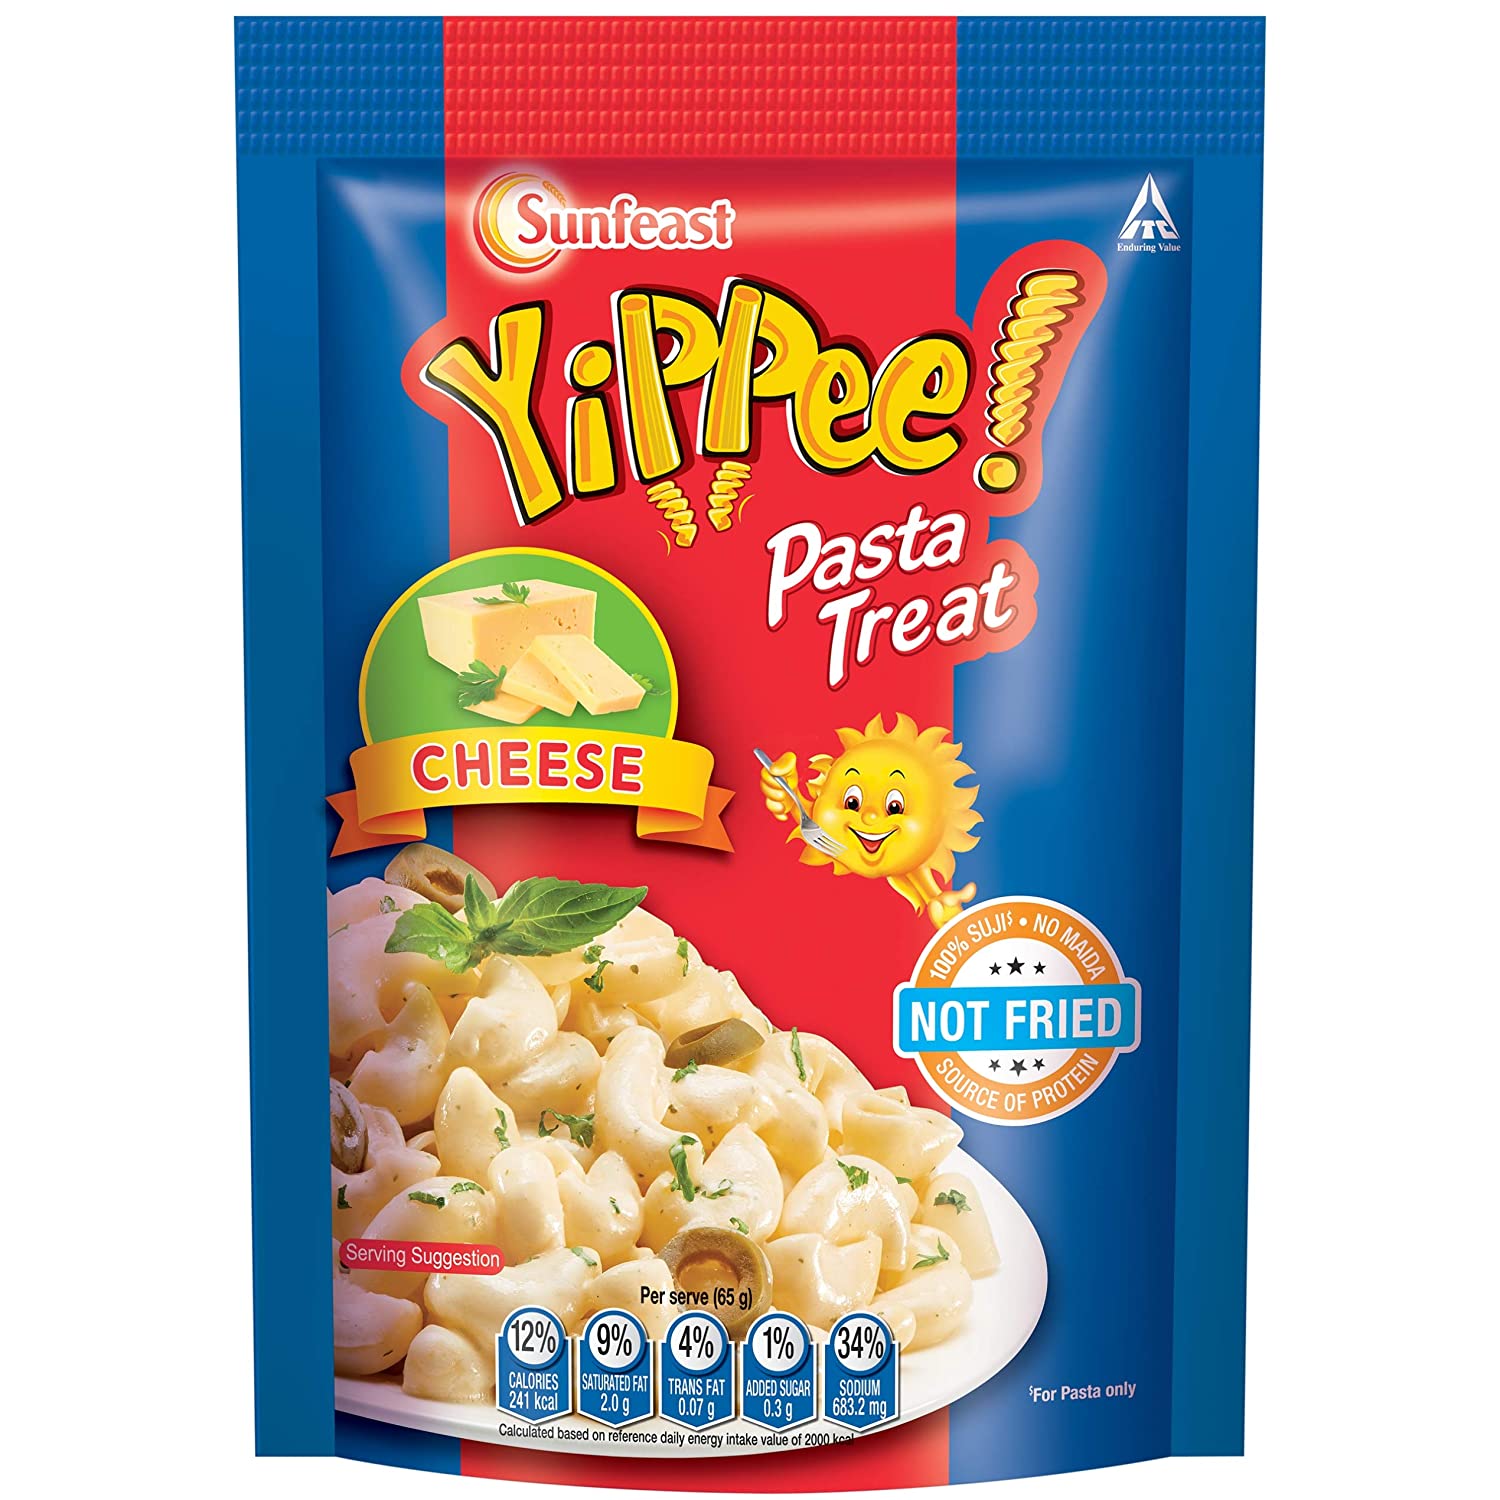 Sunfeast YiPPee Pasta Treat Cheese 65g pack